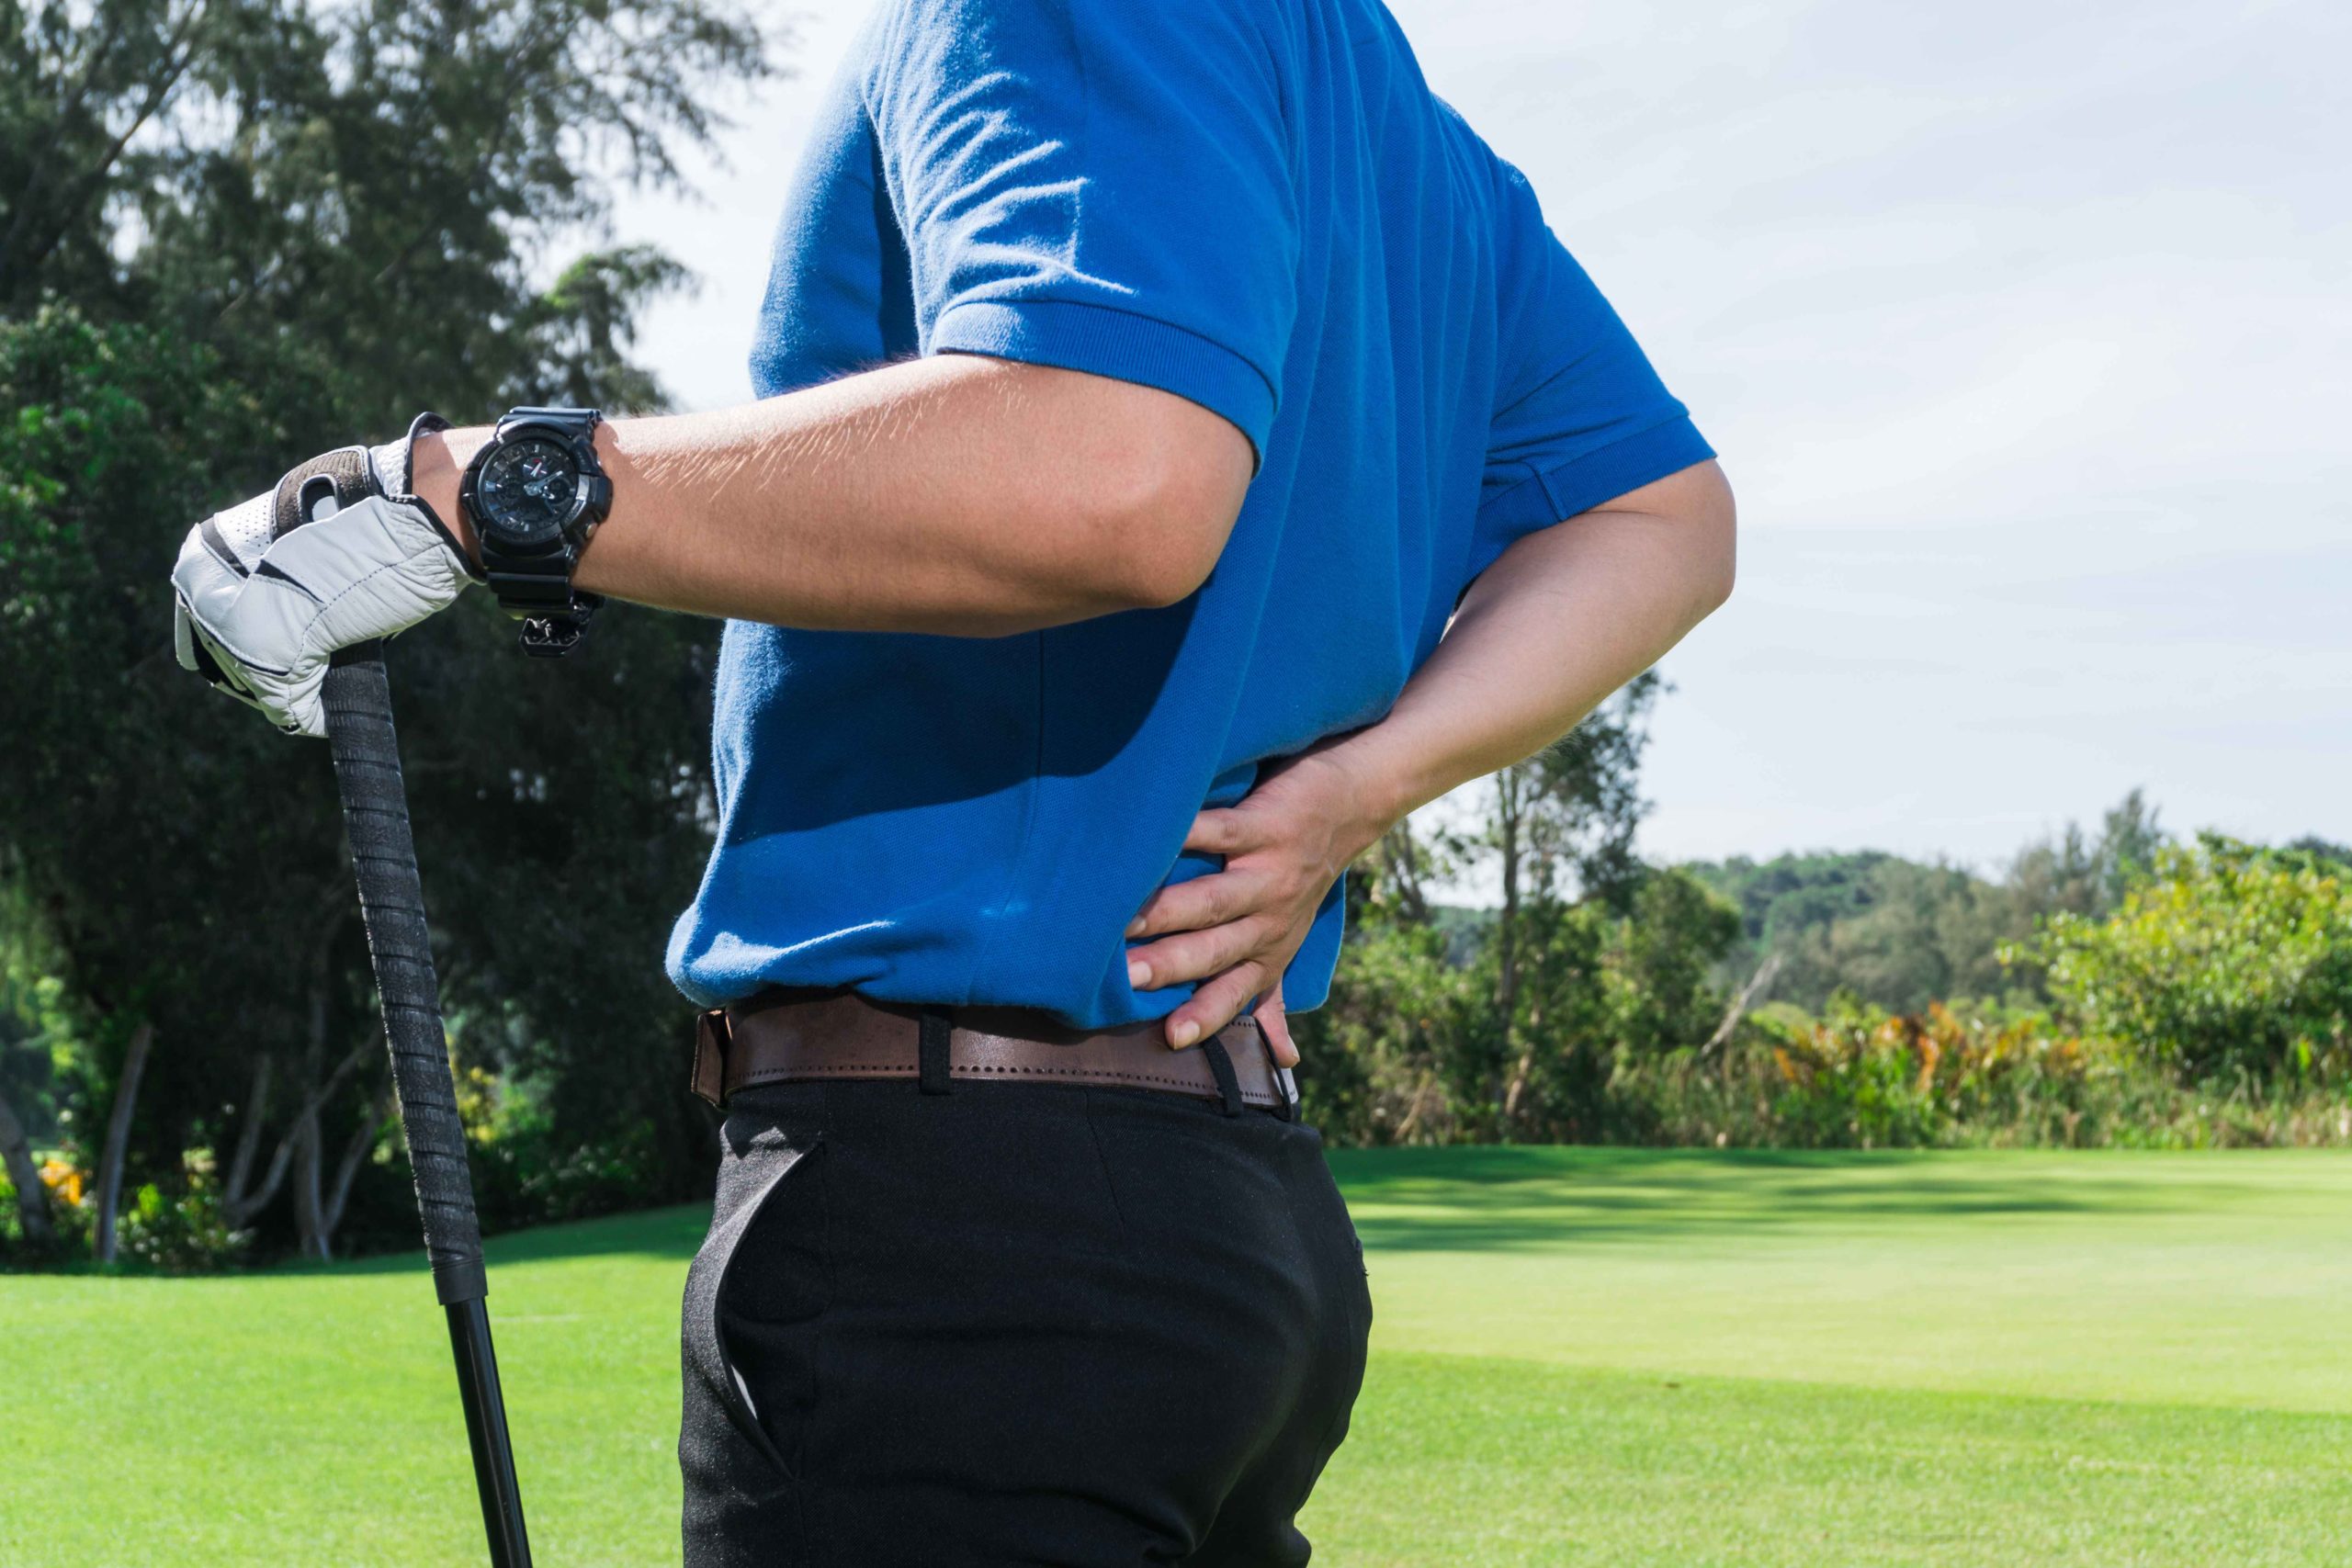 How To Improve Reaching Behind Your Back